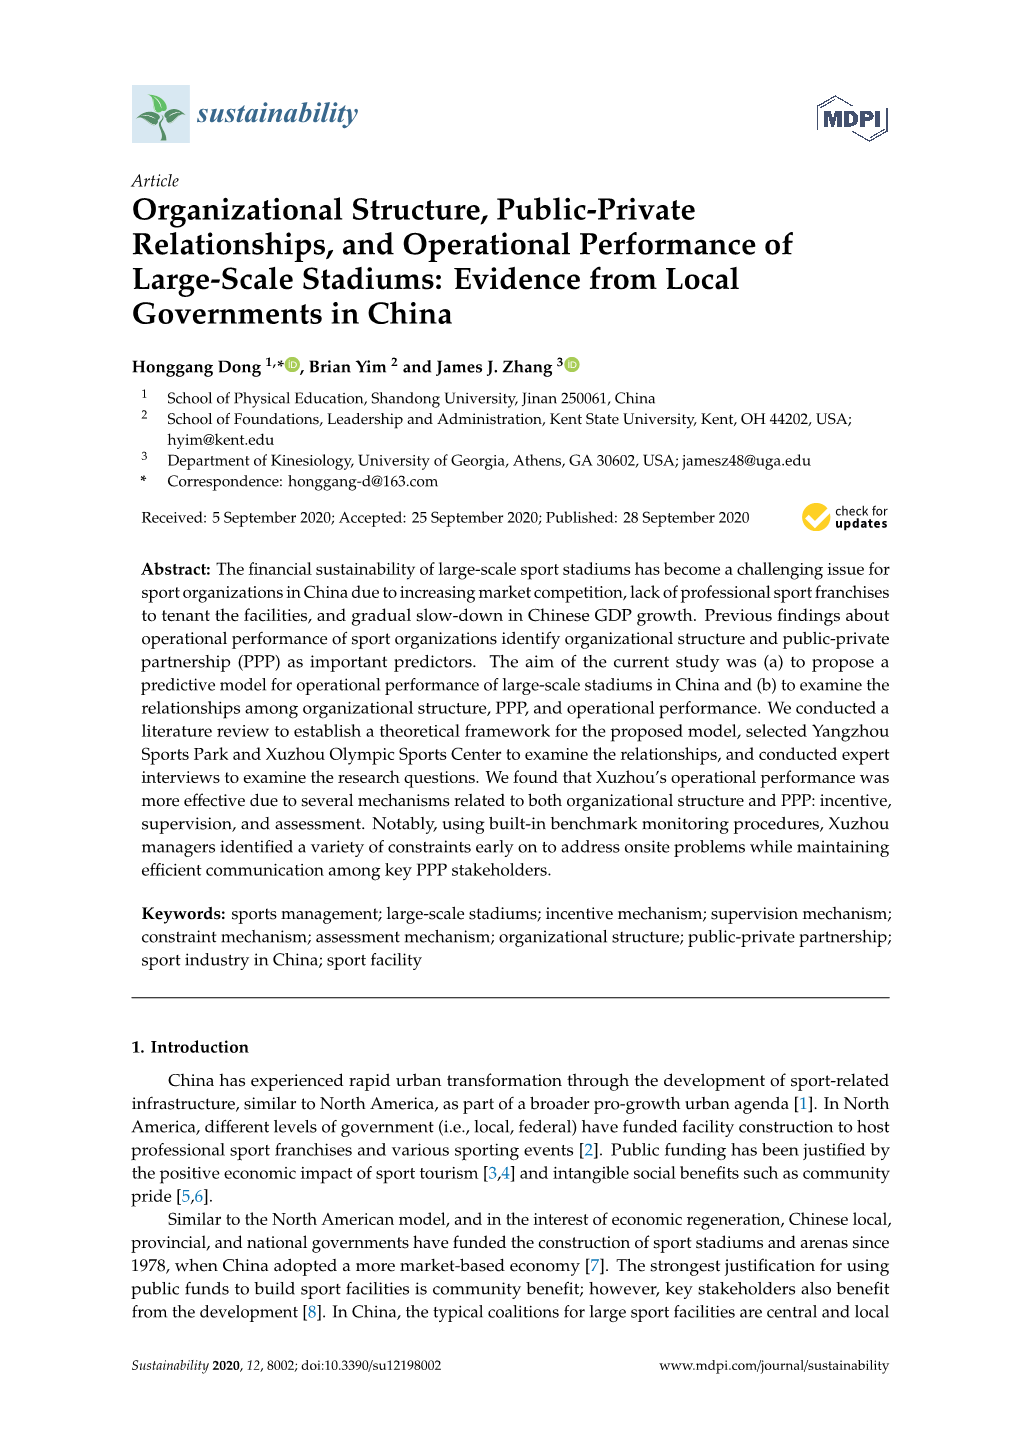 Organizational Structure, Public-Private Relationships, and Operational Performance of Large-Scale Stadiums: Evidence from Local Governments in China